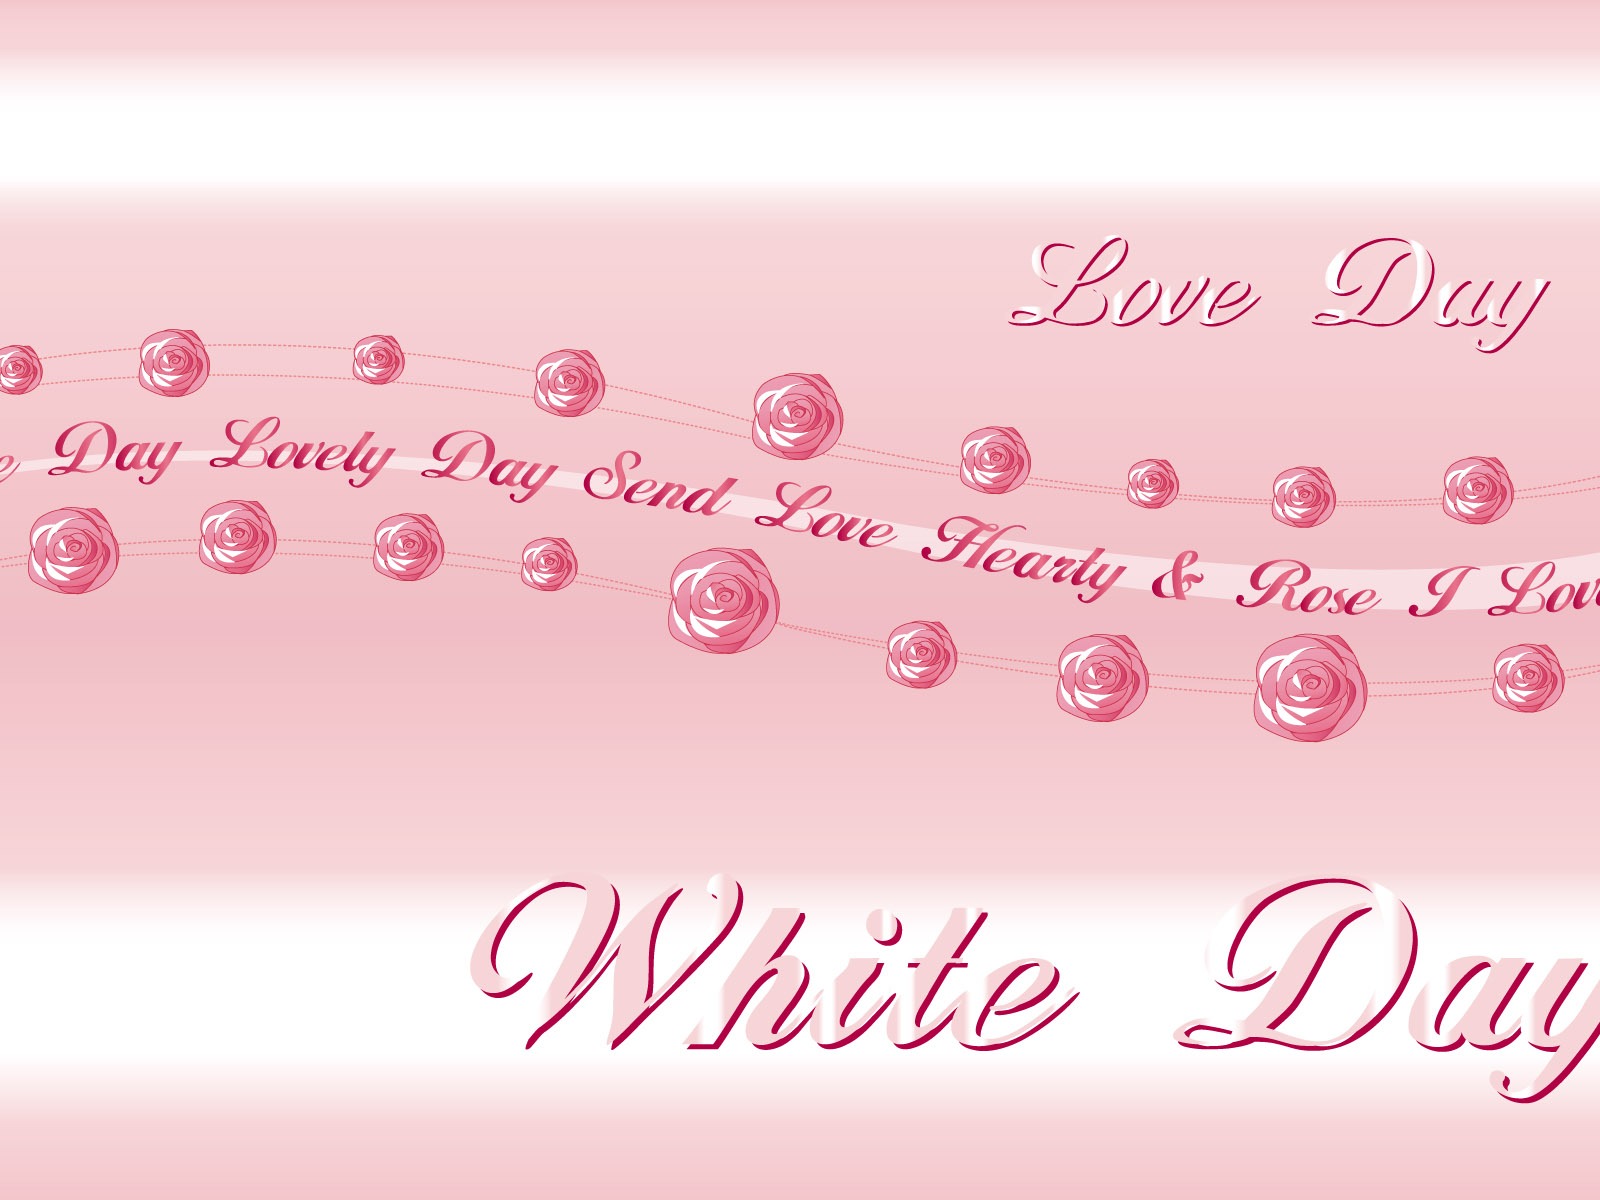 Valentine's Day Theme Wallpapers (2) #10 - 1600x1200